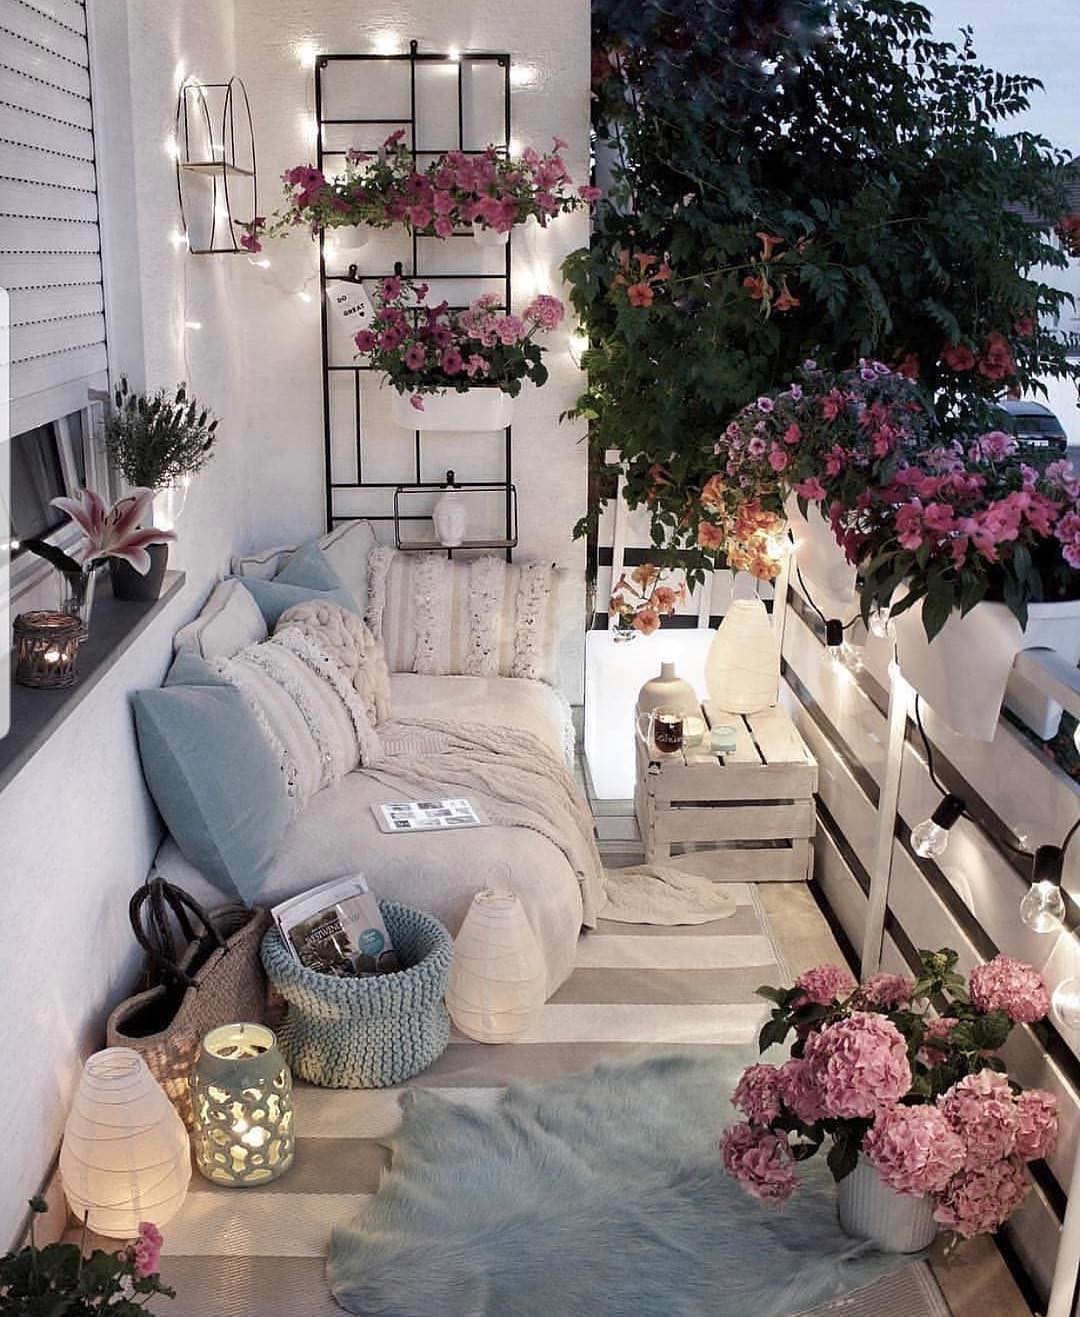 Creating a Home Oasis – Top 10 Small Balcony Ideas